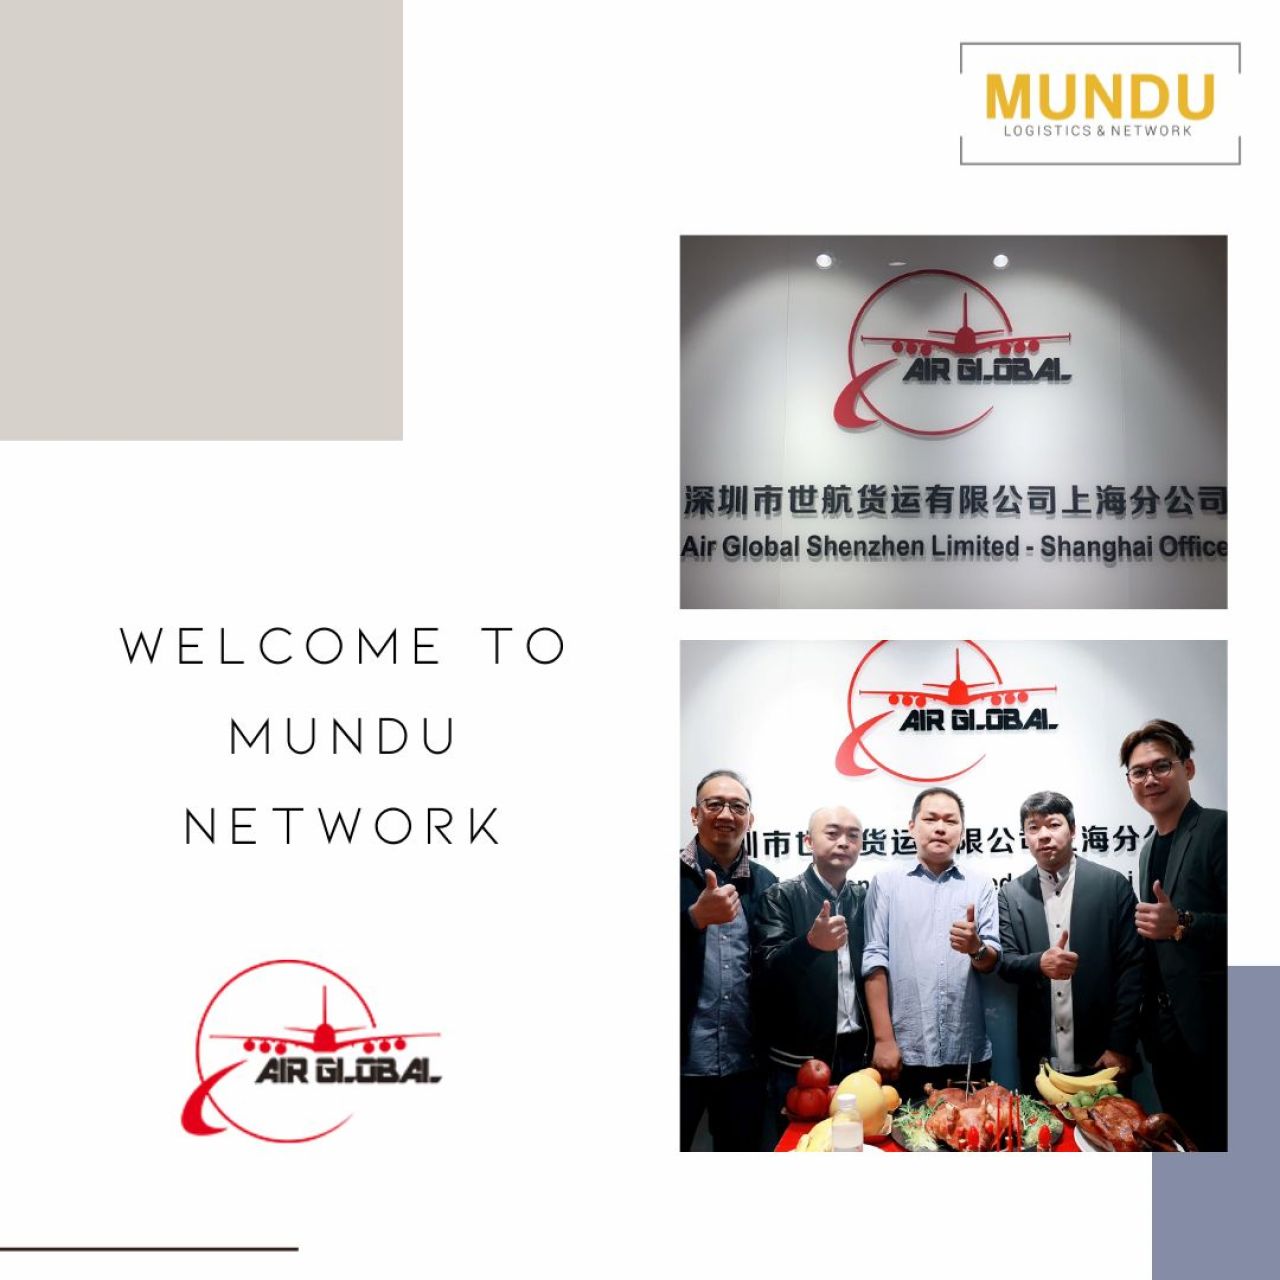 Air Global joins MUNDU with 3rd office